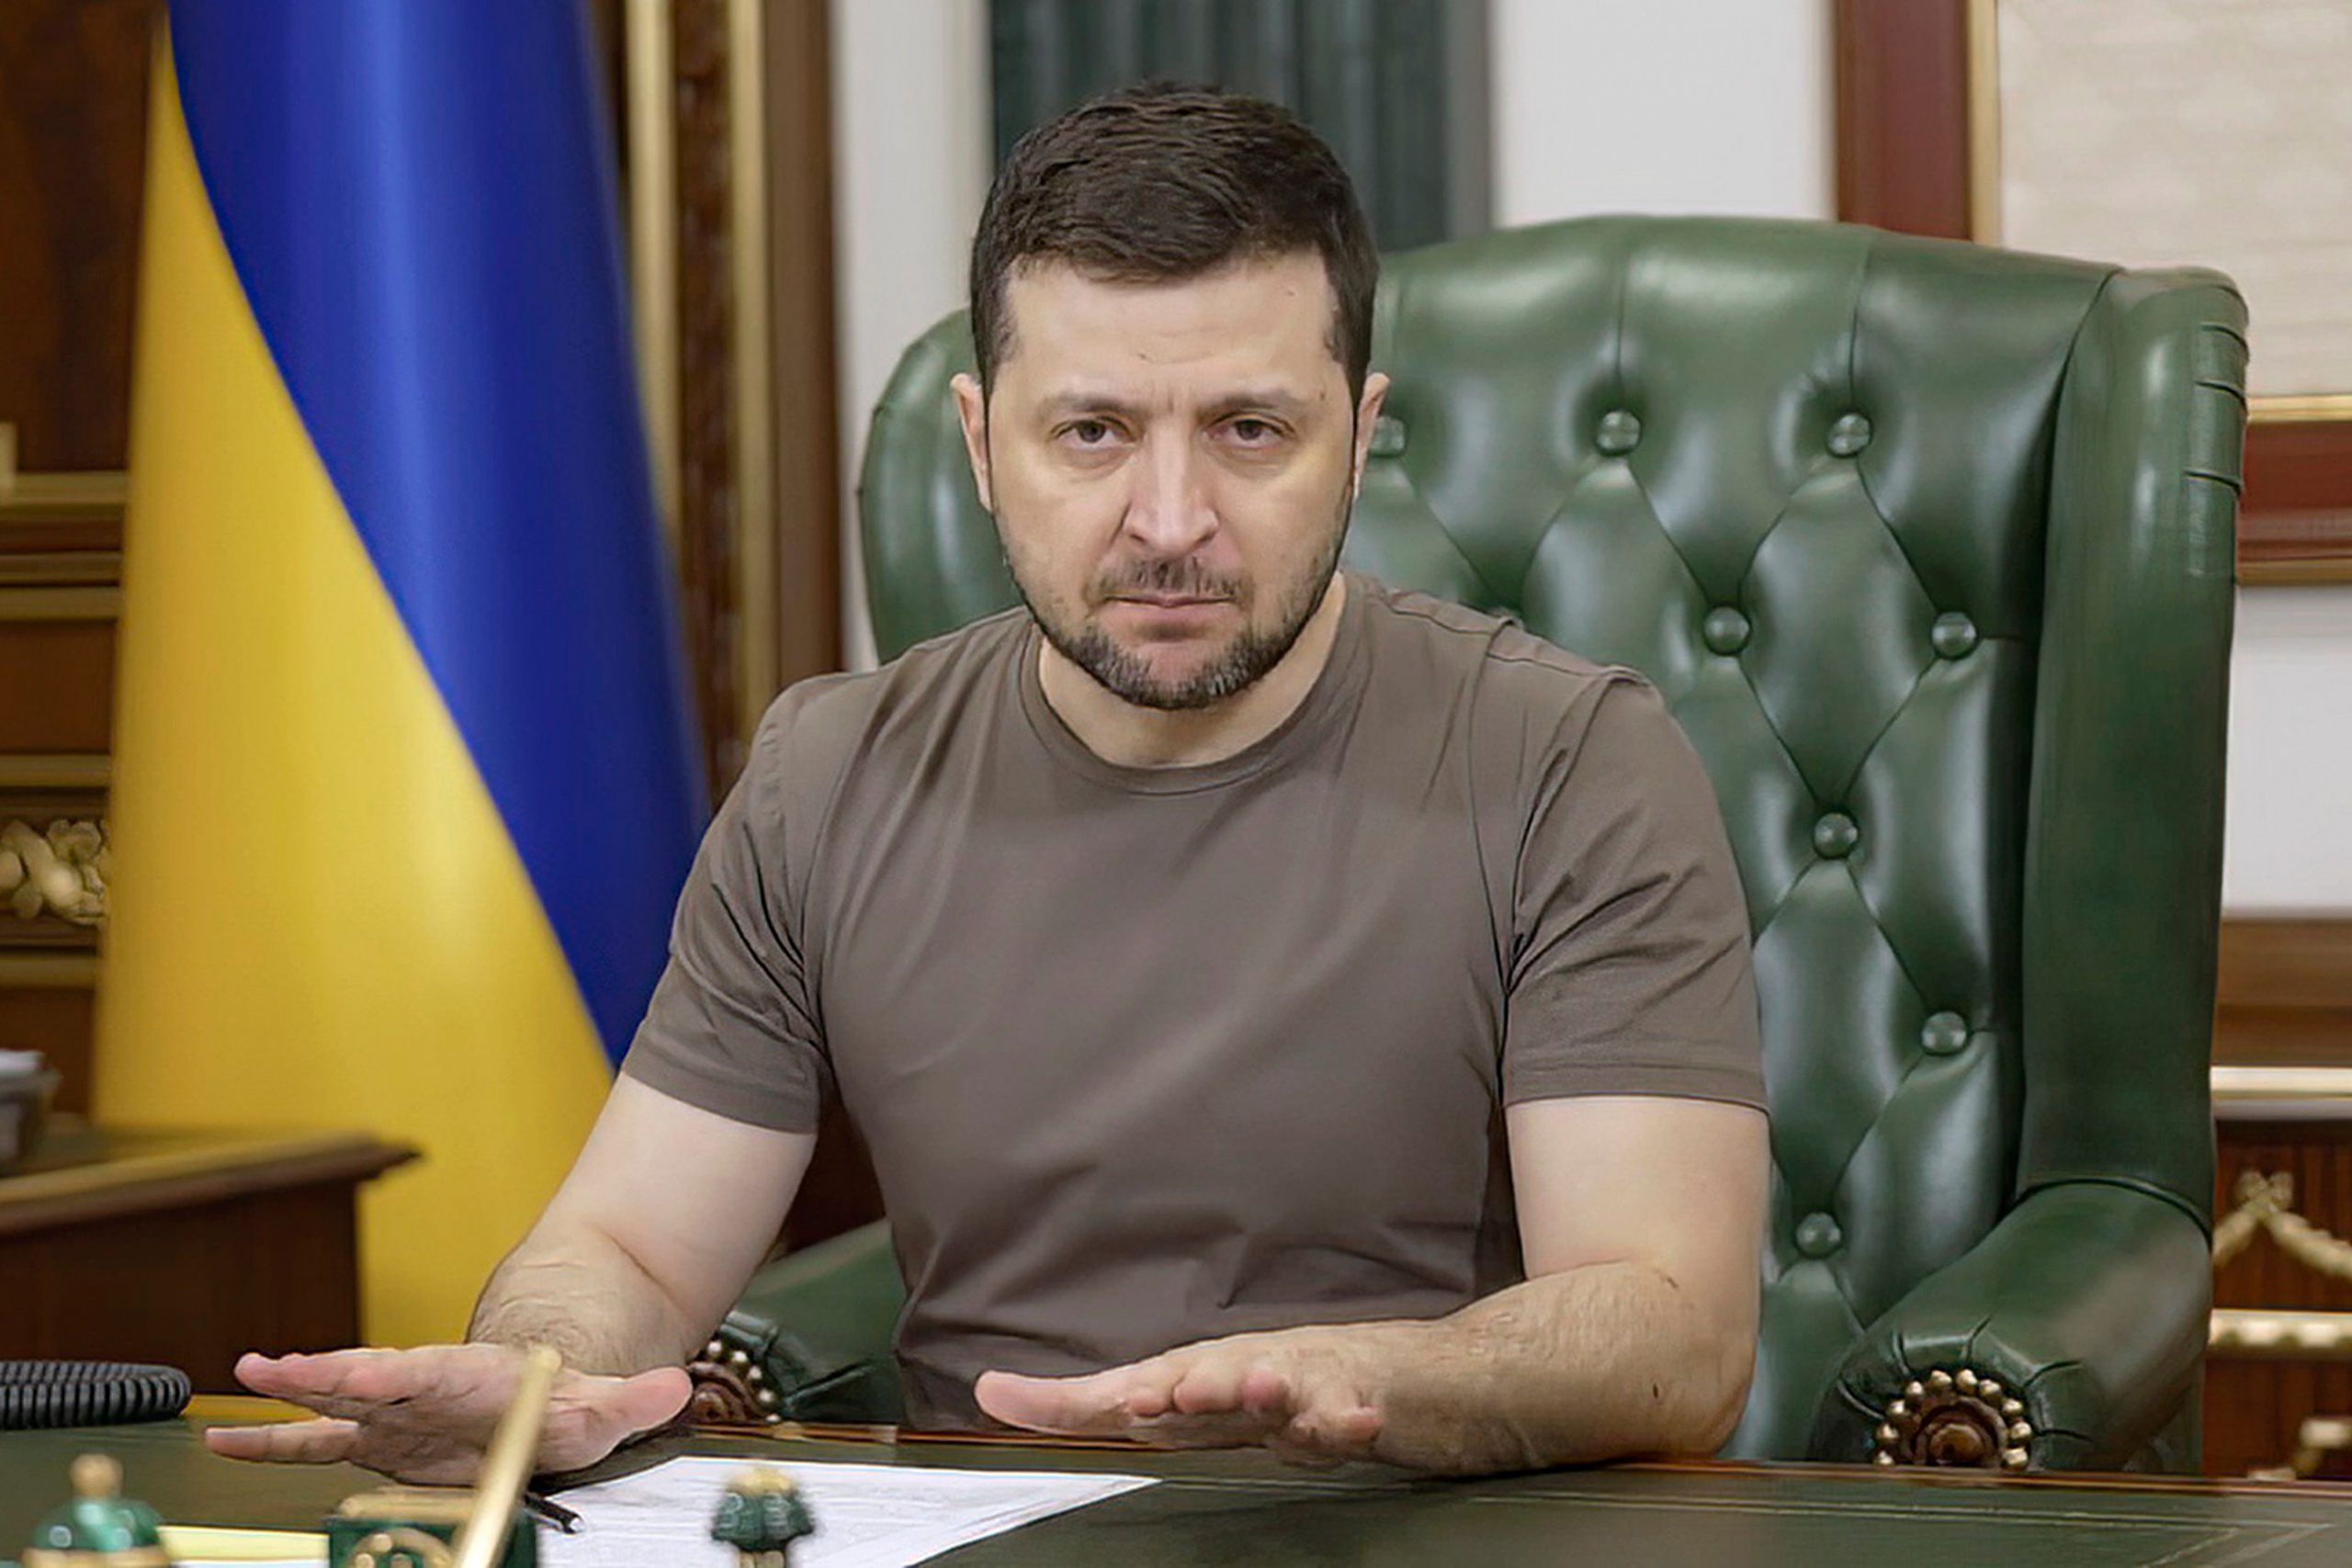 Ukrainian President Volodymyr Zelensky vows victory on 100th day of Russian invasion